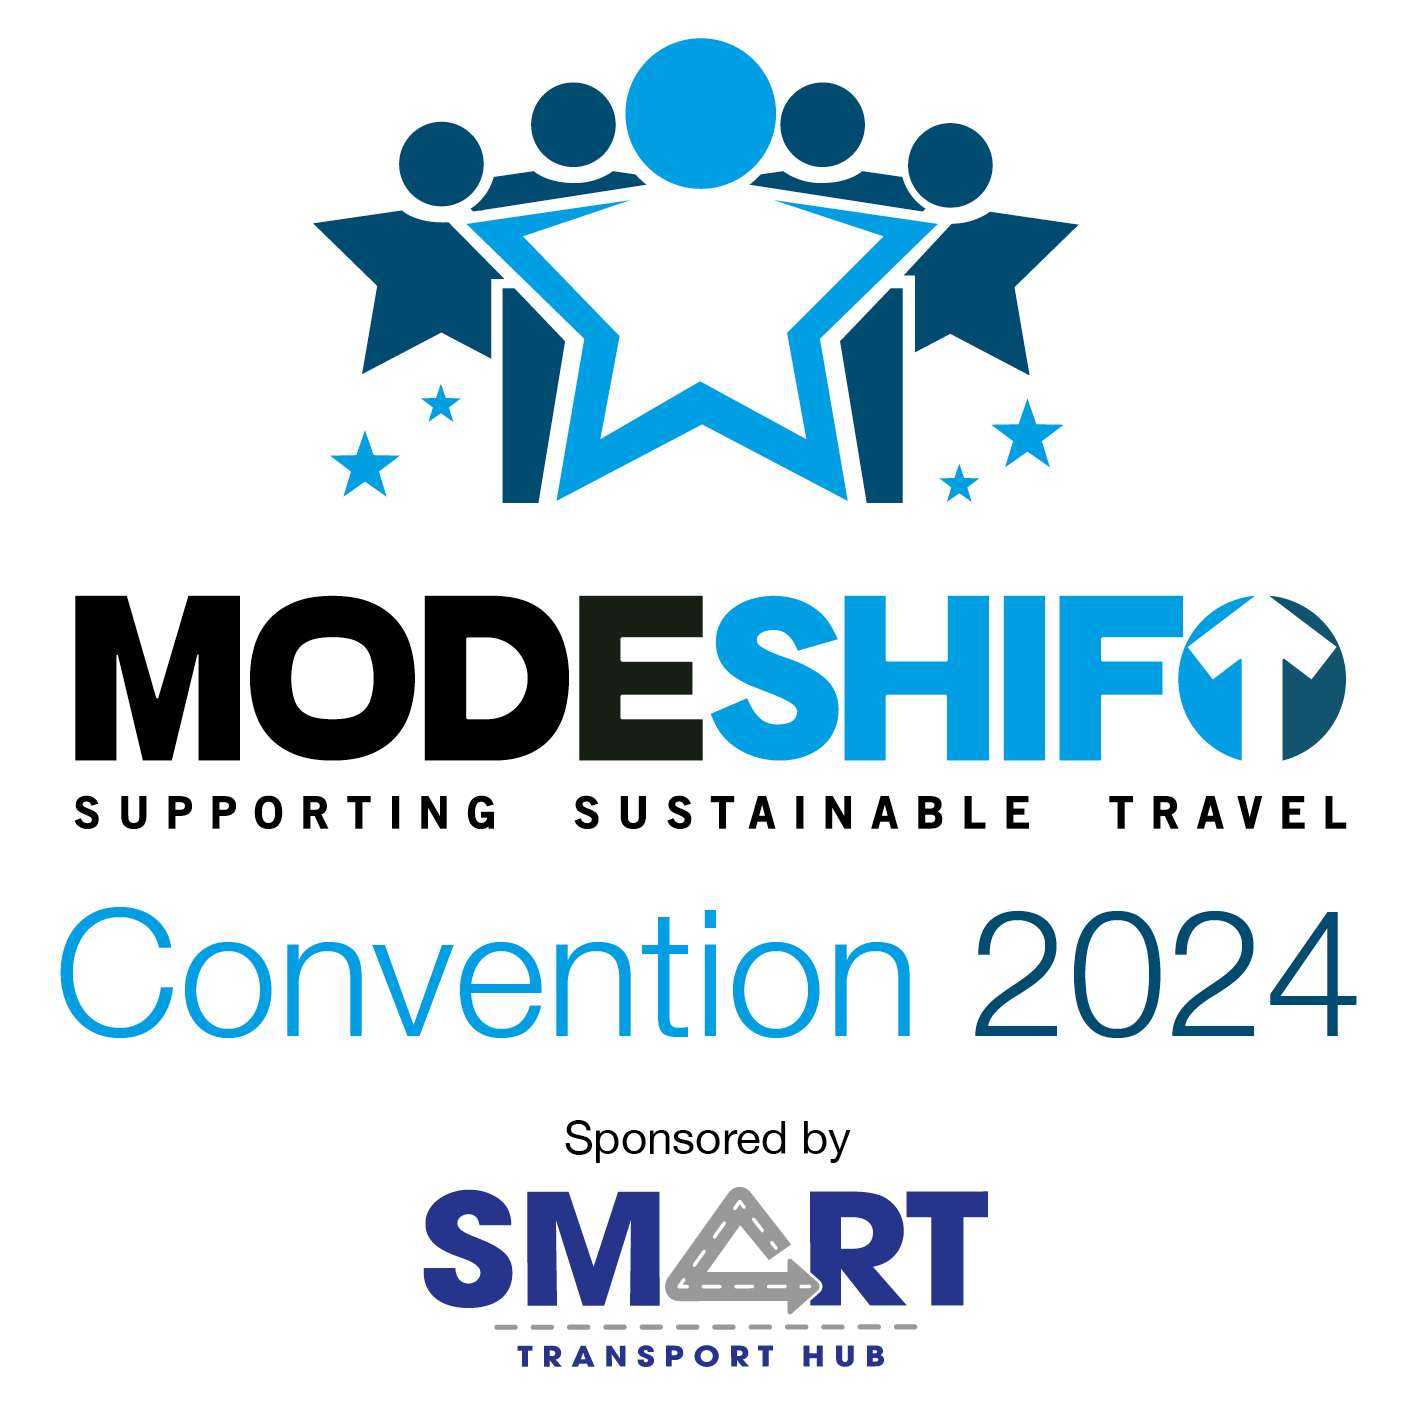 Modeshift Convention logo. Blue text on white background. Text reads: Convention 2024 sponsored by Smart Transport Hub.